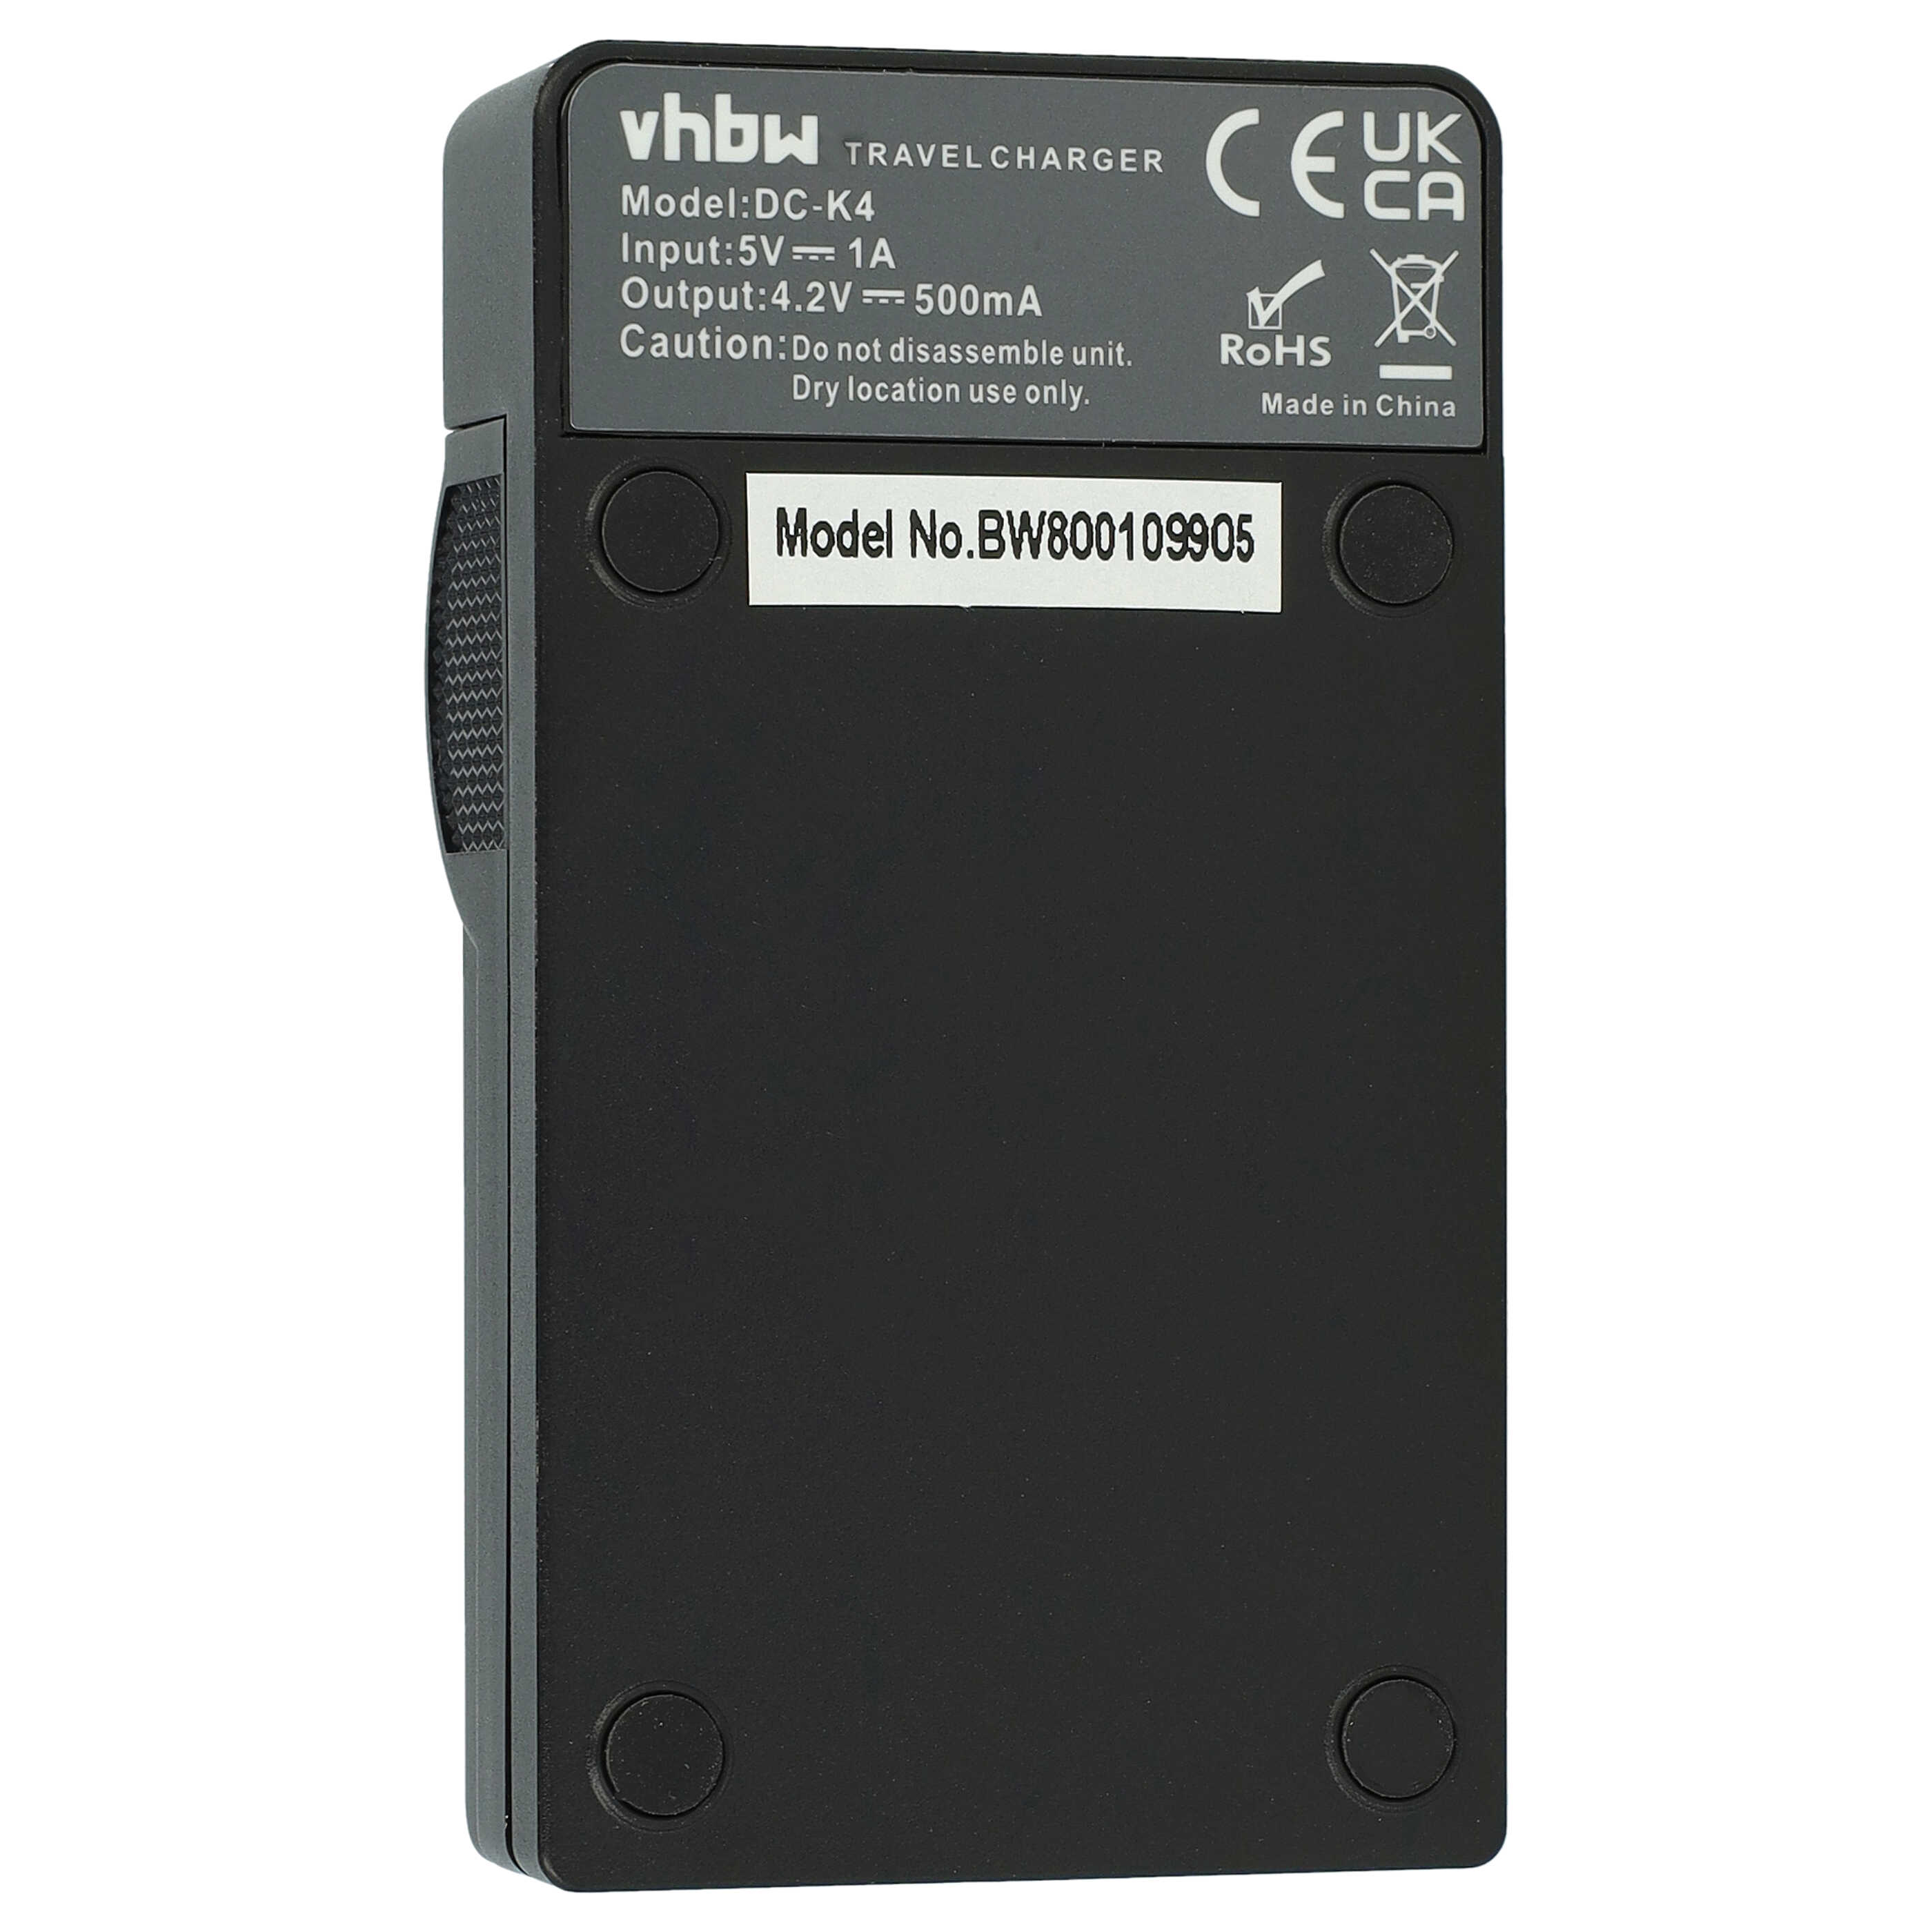 Battery Charger suitable for Canon BP-709 Camera etc. - 0.5 A, 4.2 V